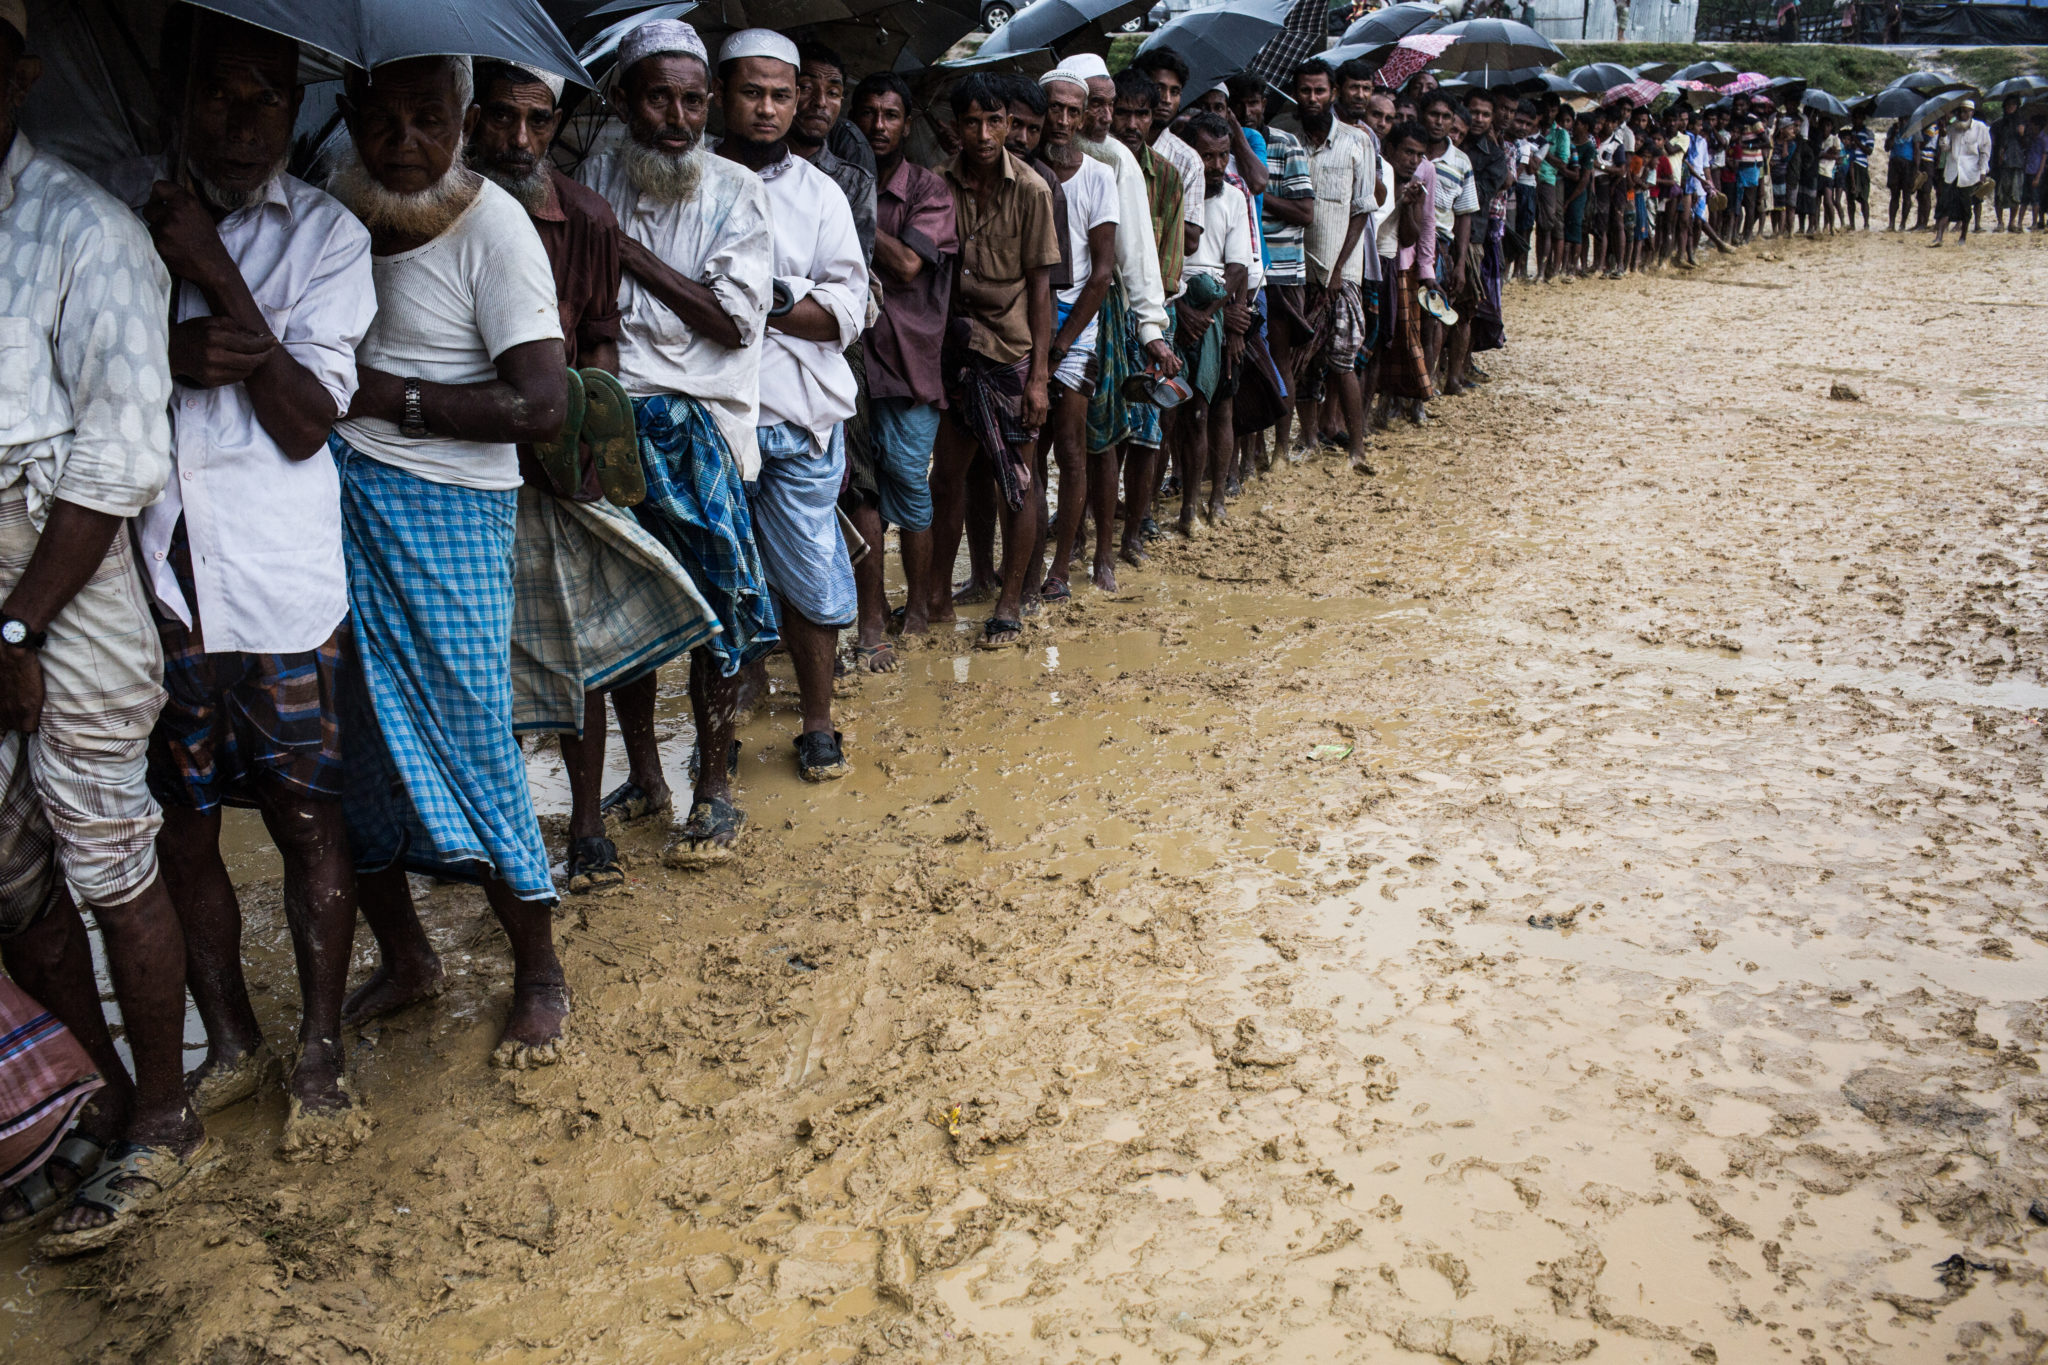 Bangladesh: Rohingya refugees returns must be safe, voluntary and dignified